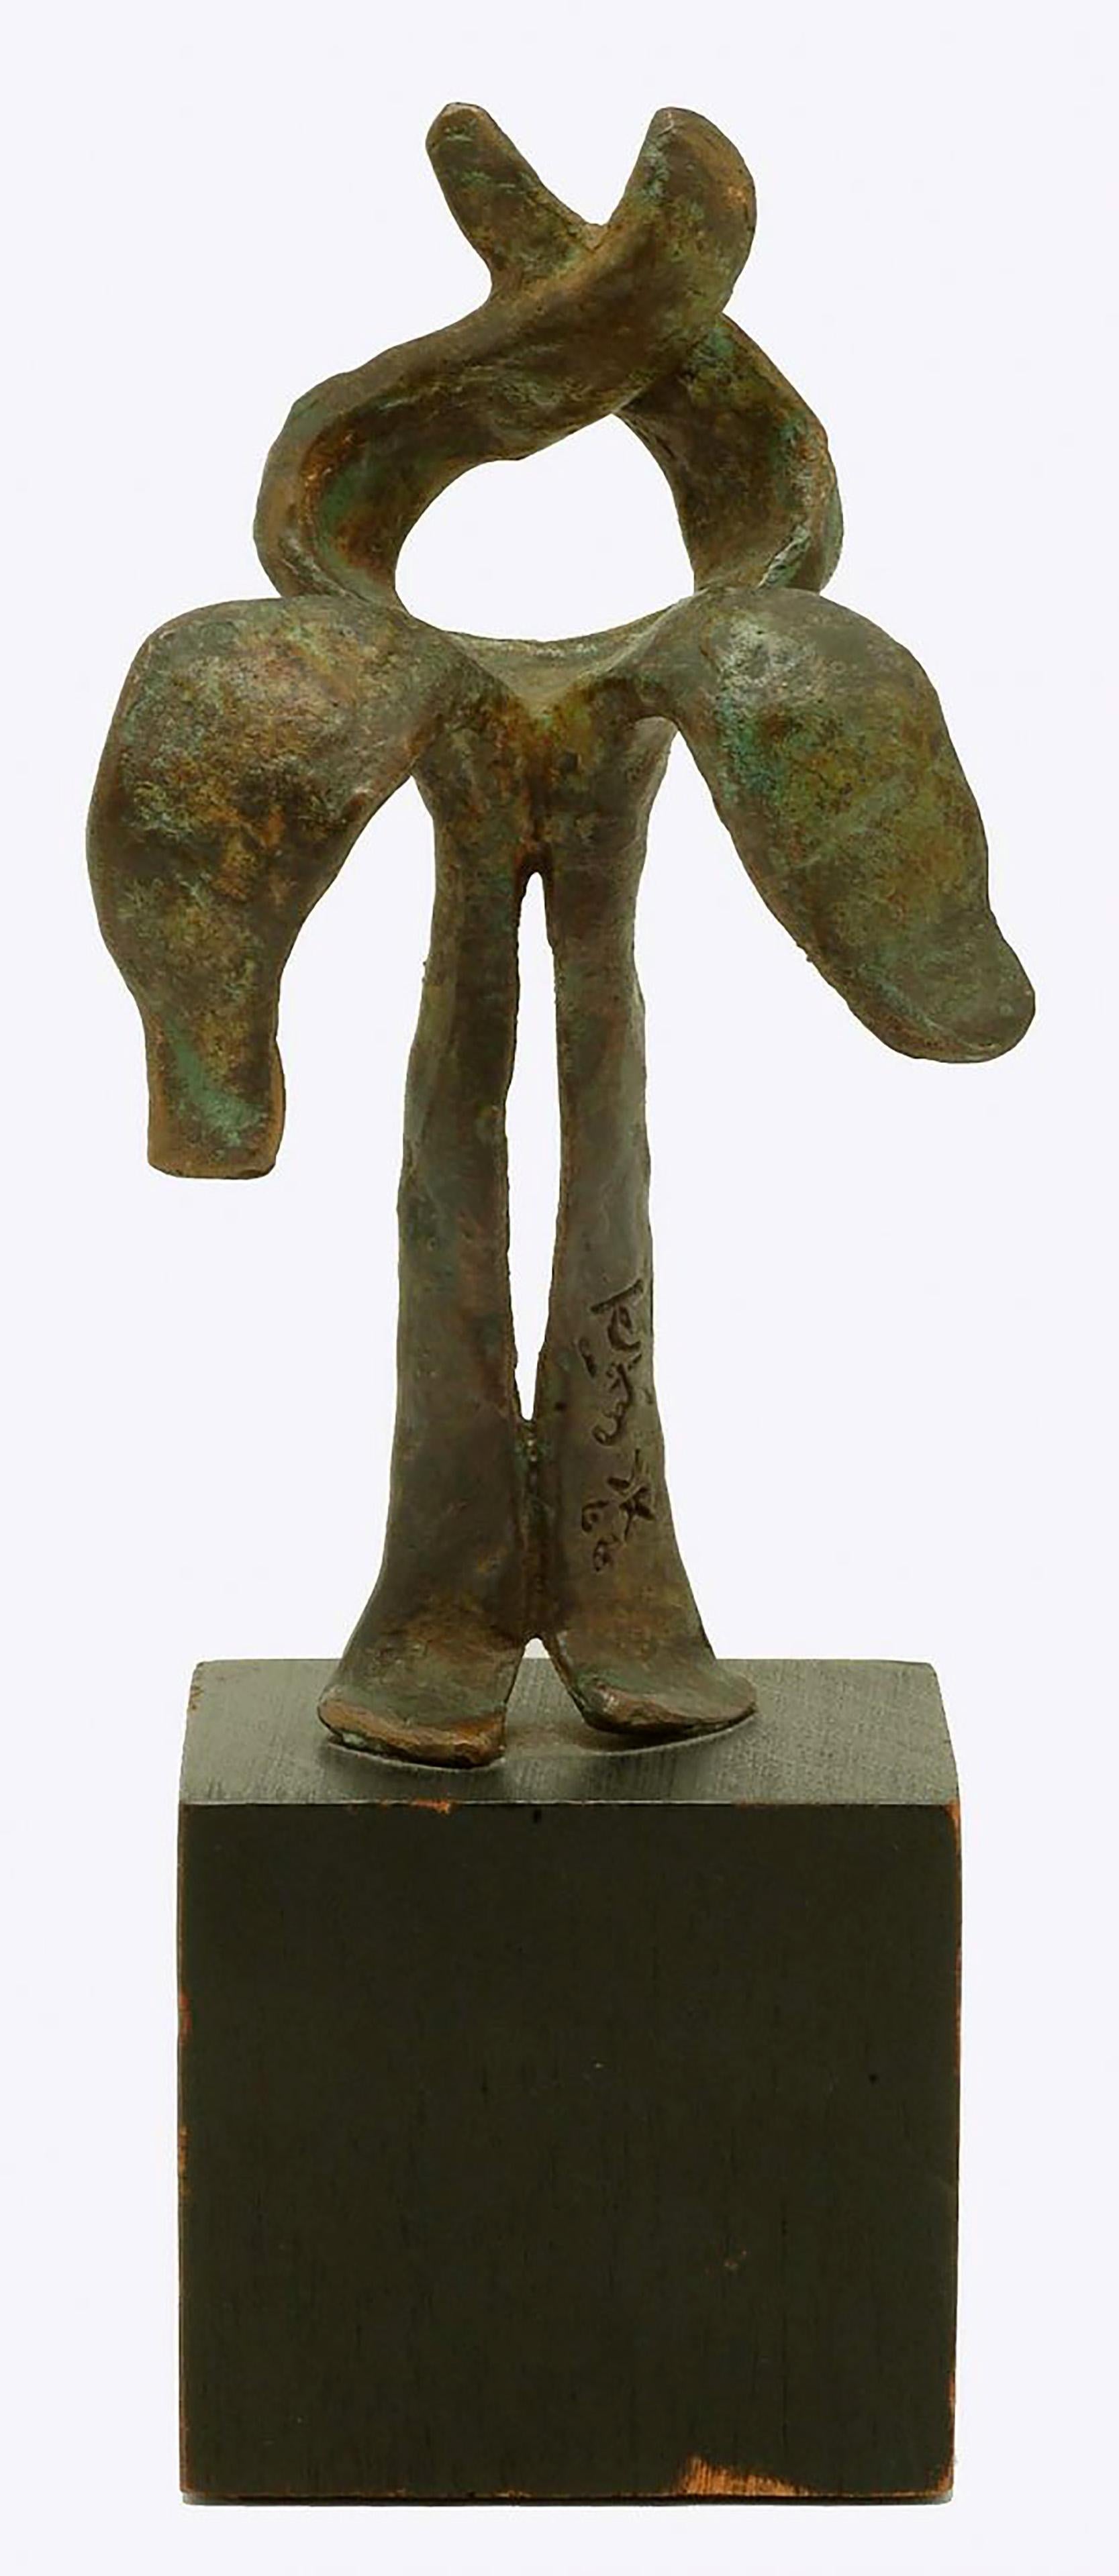 Nathaniel Kaz
Bronze Sculpture to Isaac Bashevis Singer for Arts in Judaism Award, 1966
Bronze, Square wooden base, Metal tag
Signed and dated 